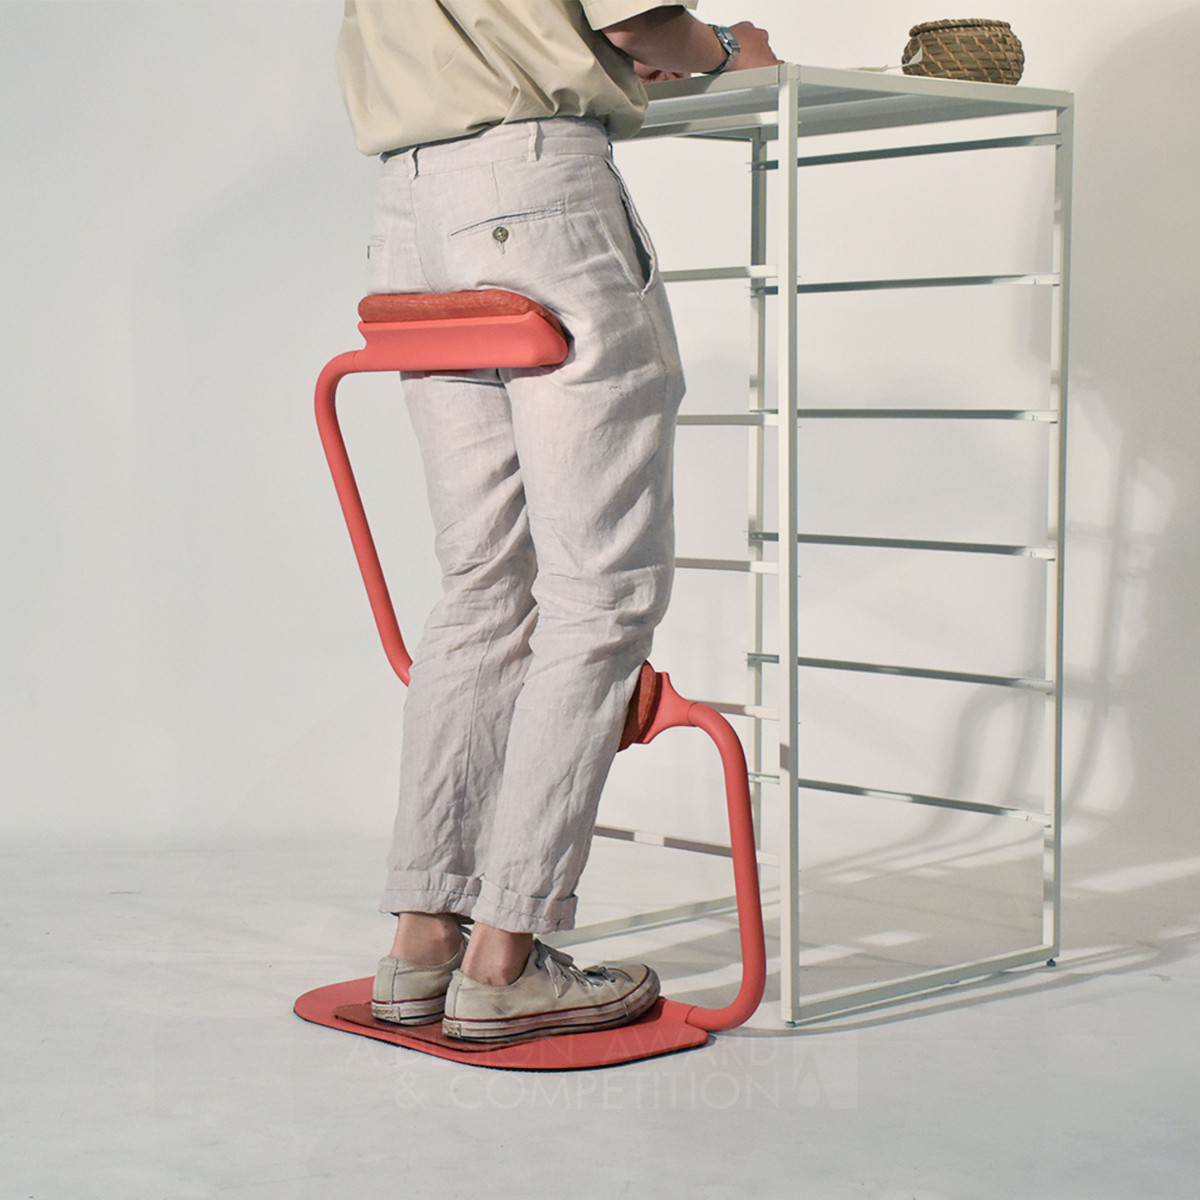 Standly Bao Folding Chair by Ming Hsiu Lee